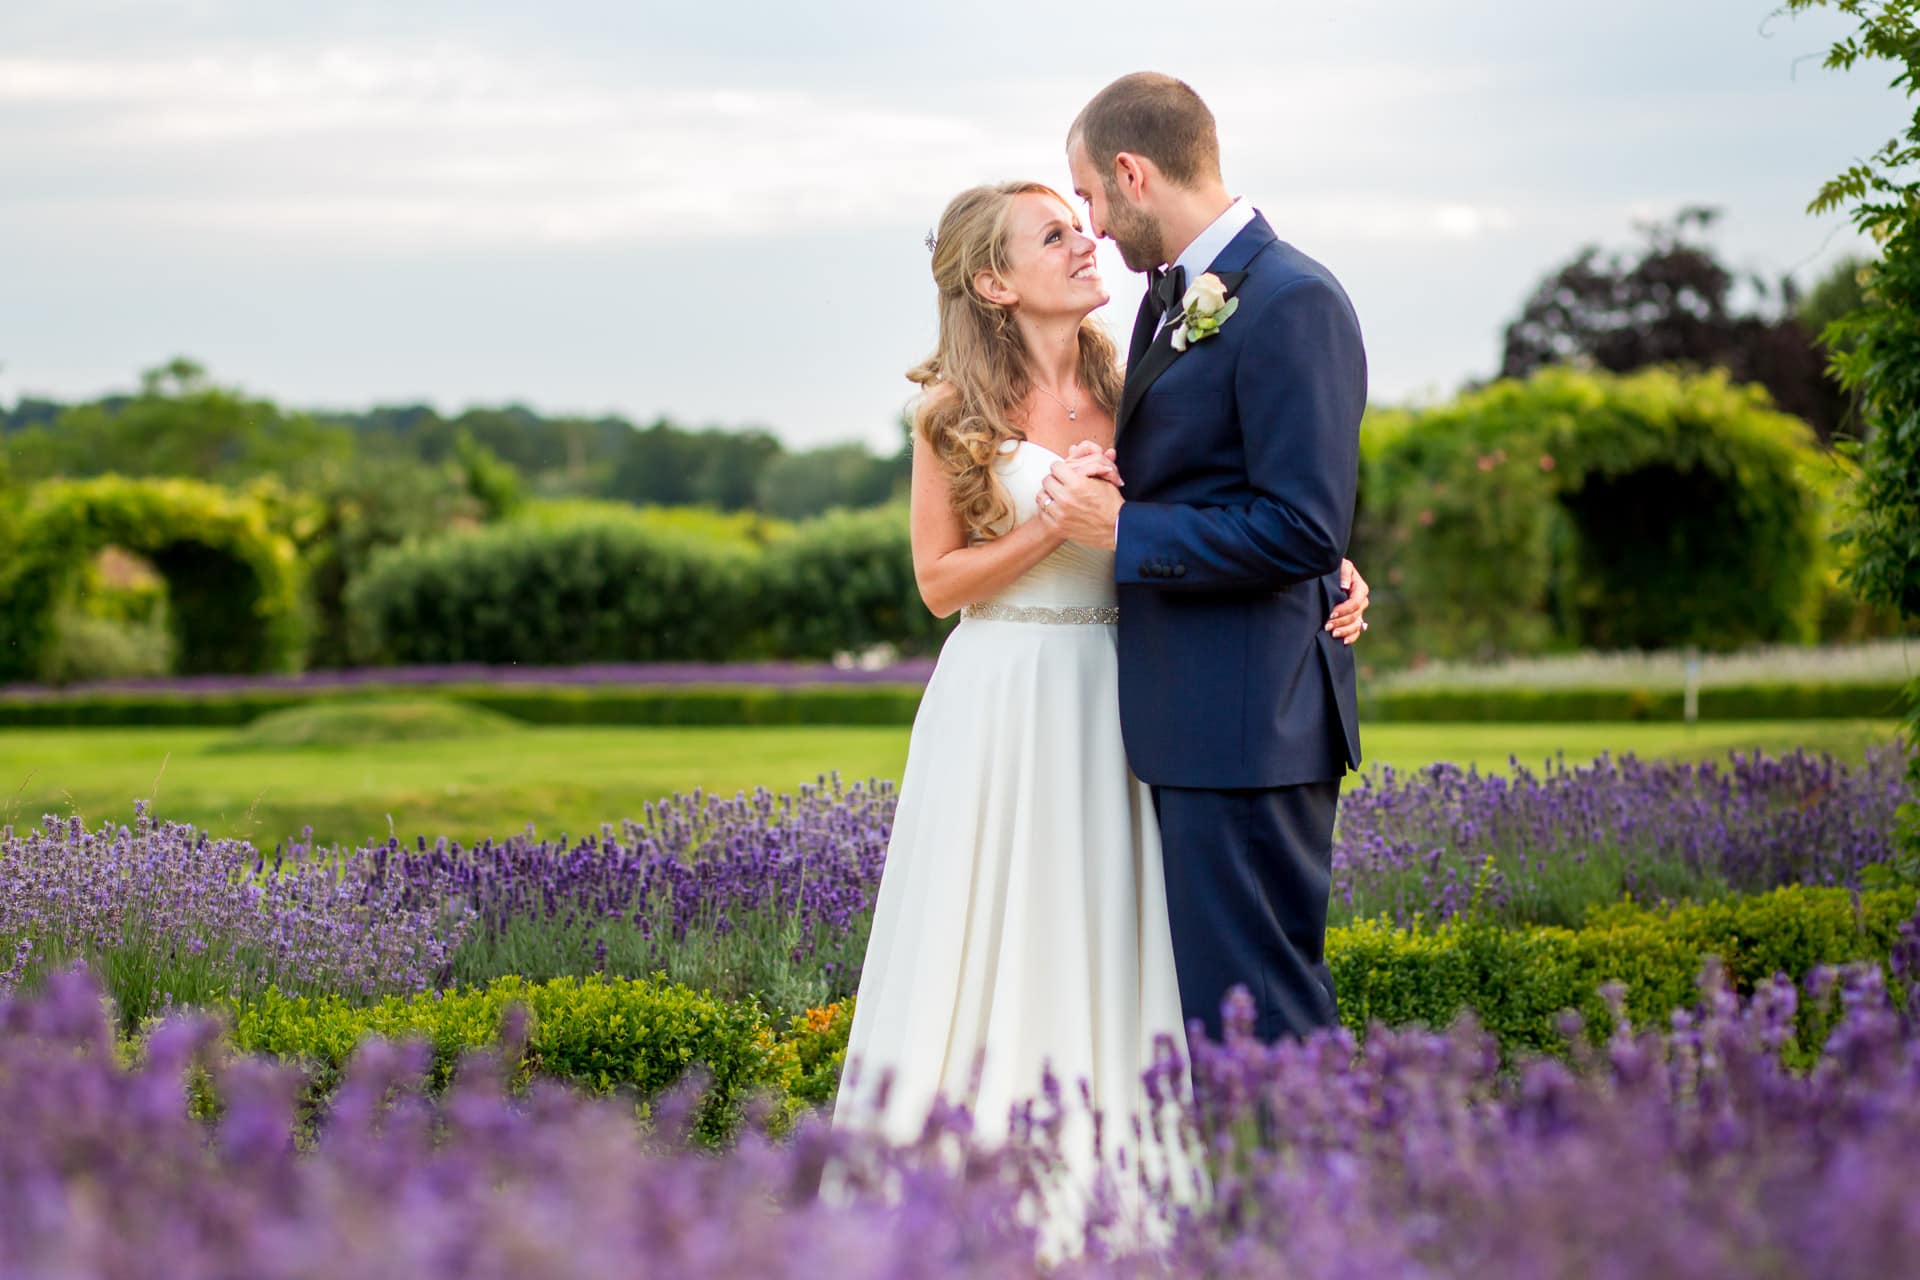 pretty lavender shot of a bride and groom